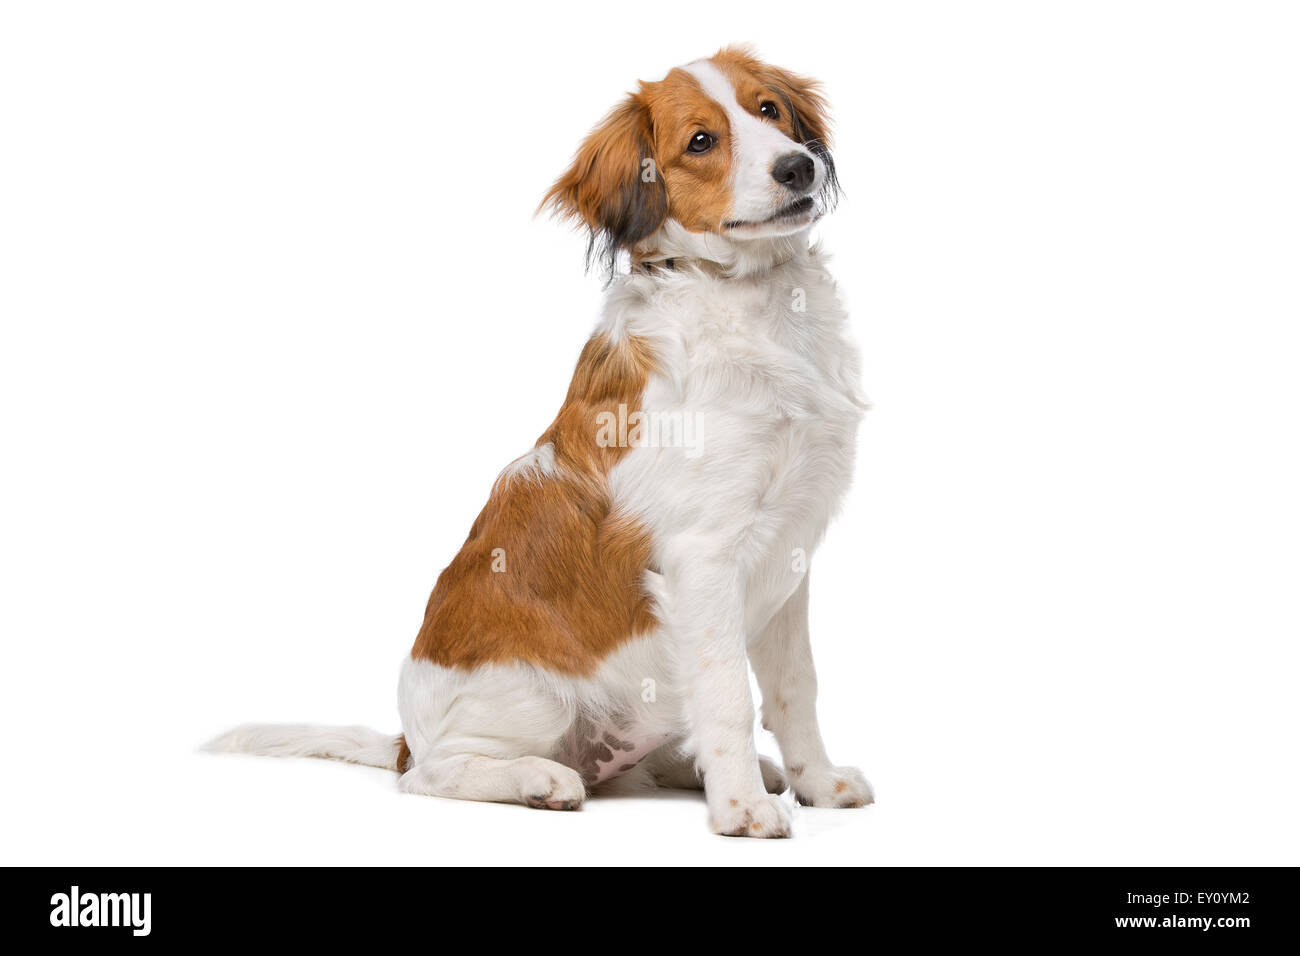 Kooiker dog, Dutch Dog breed, in front of a white background Stock Photo